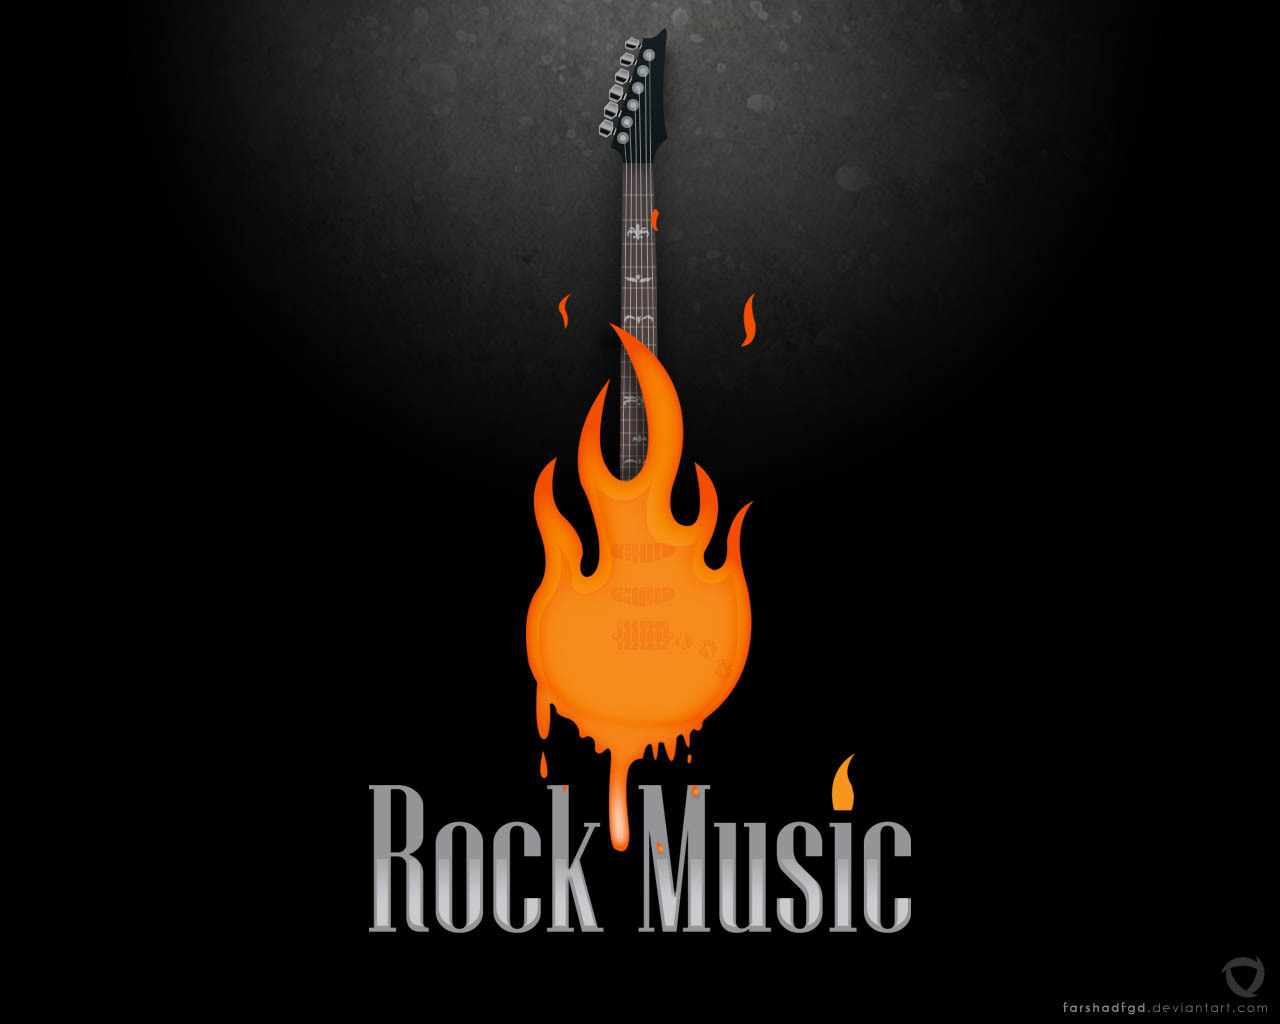 Rock Music Image HD Wallpaper And Background Photos